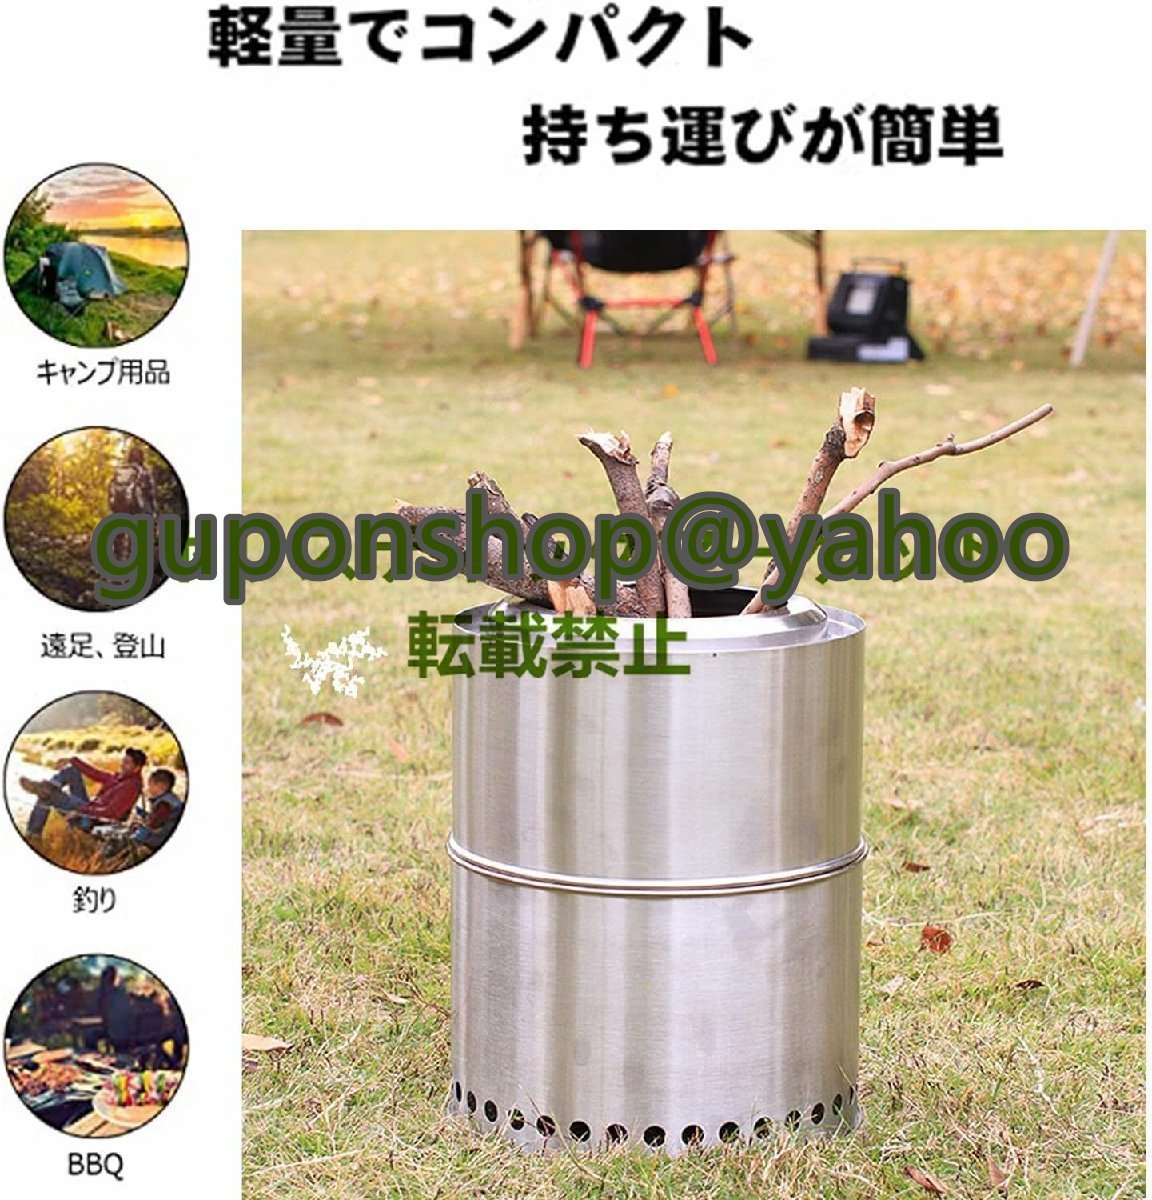  popular recommendation * stove Solo stove f Ray m stove stainless steel wood stove camp stove . fire pcs stove light weight 